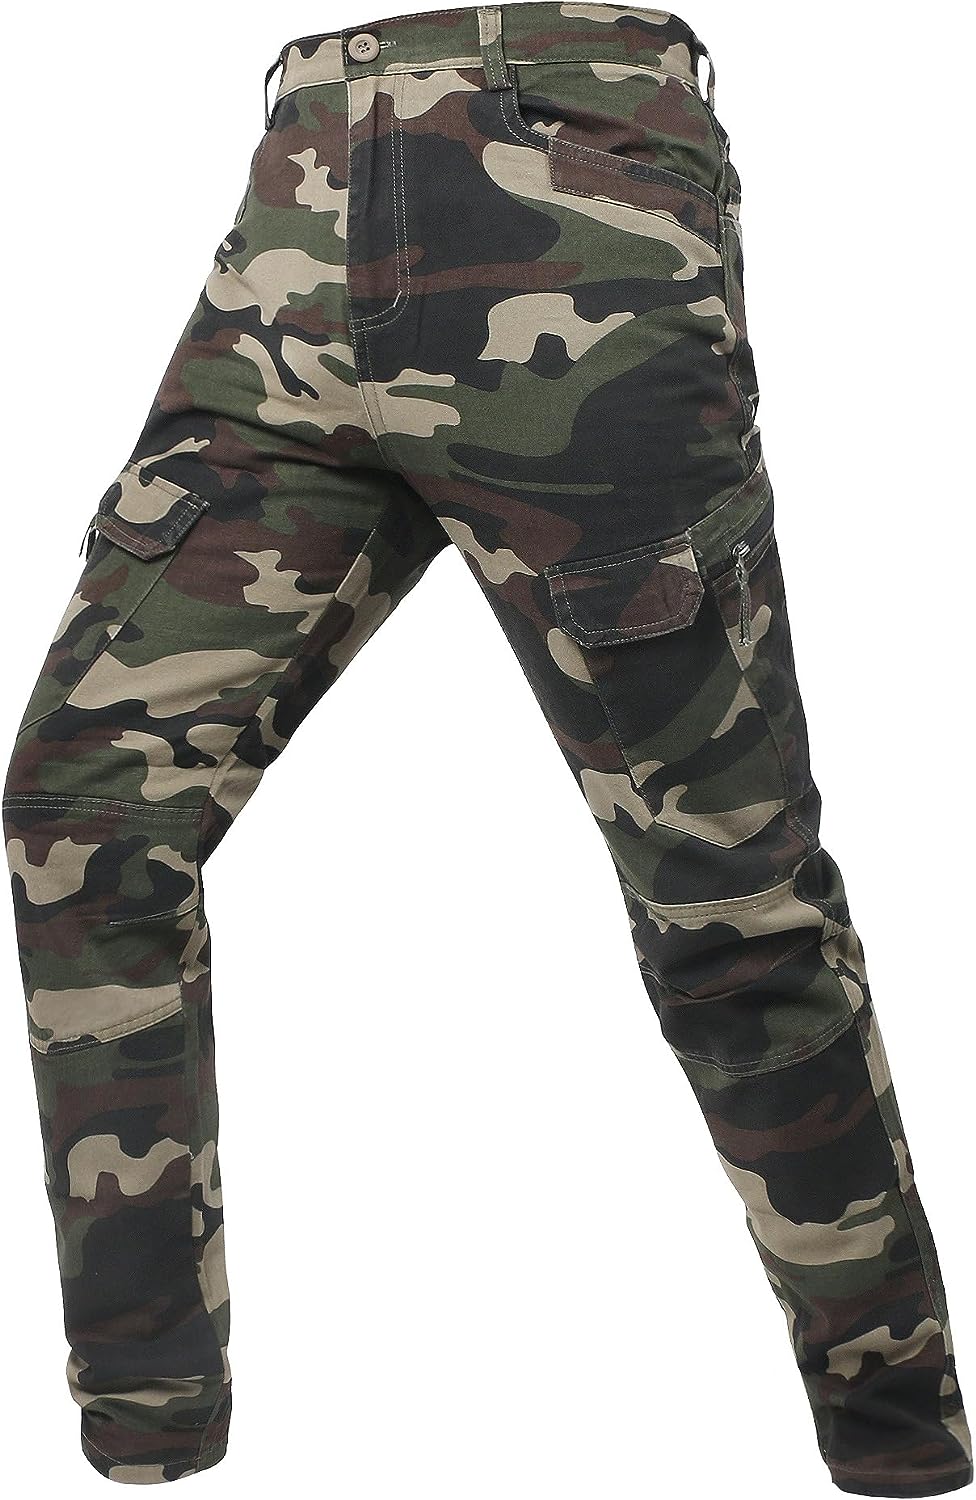 Buy zeetoo Mens Relaxed-Fit Cargo Pants Multi Pocket Military Camo